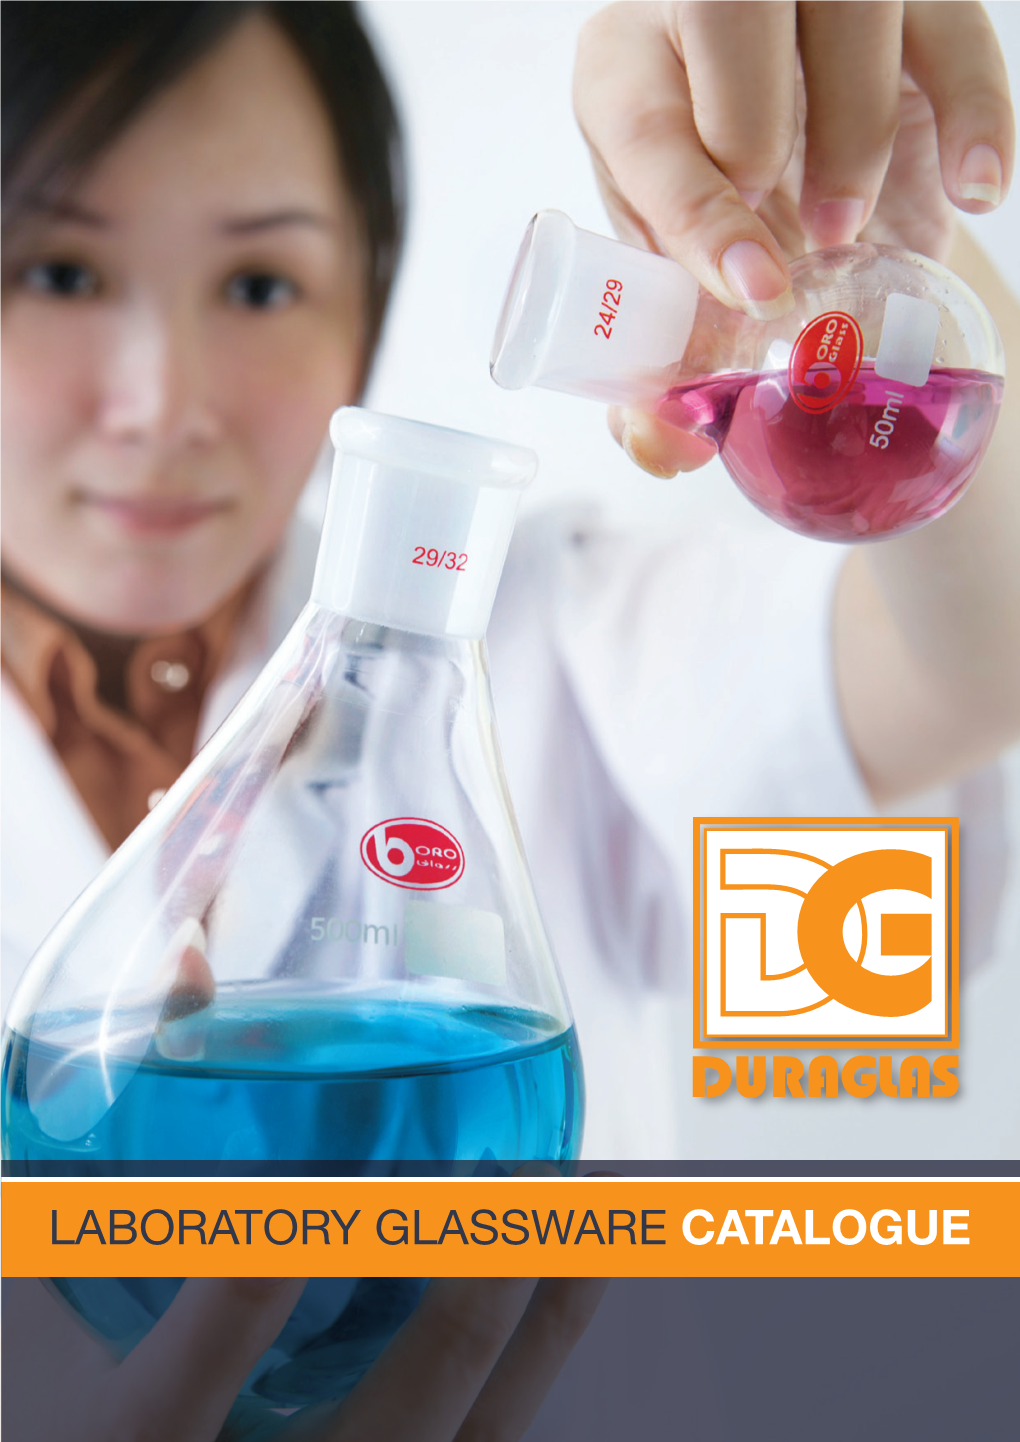 LABORATORY GLASSWARE CATALOGUE WELCOME NOTE We Are Delighted with Your Interest in Our Chemical and Heat-Resistant Duraglas Laboratory Glassware